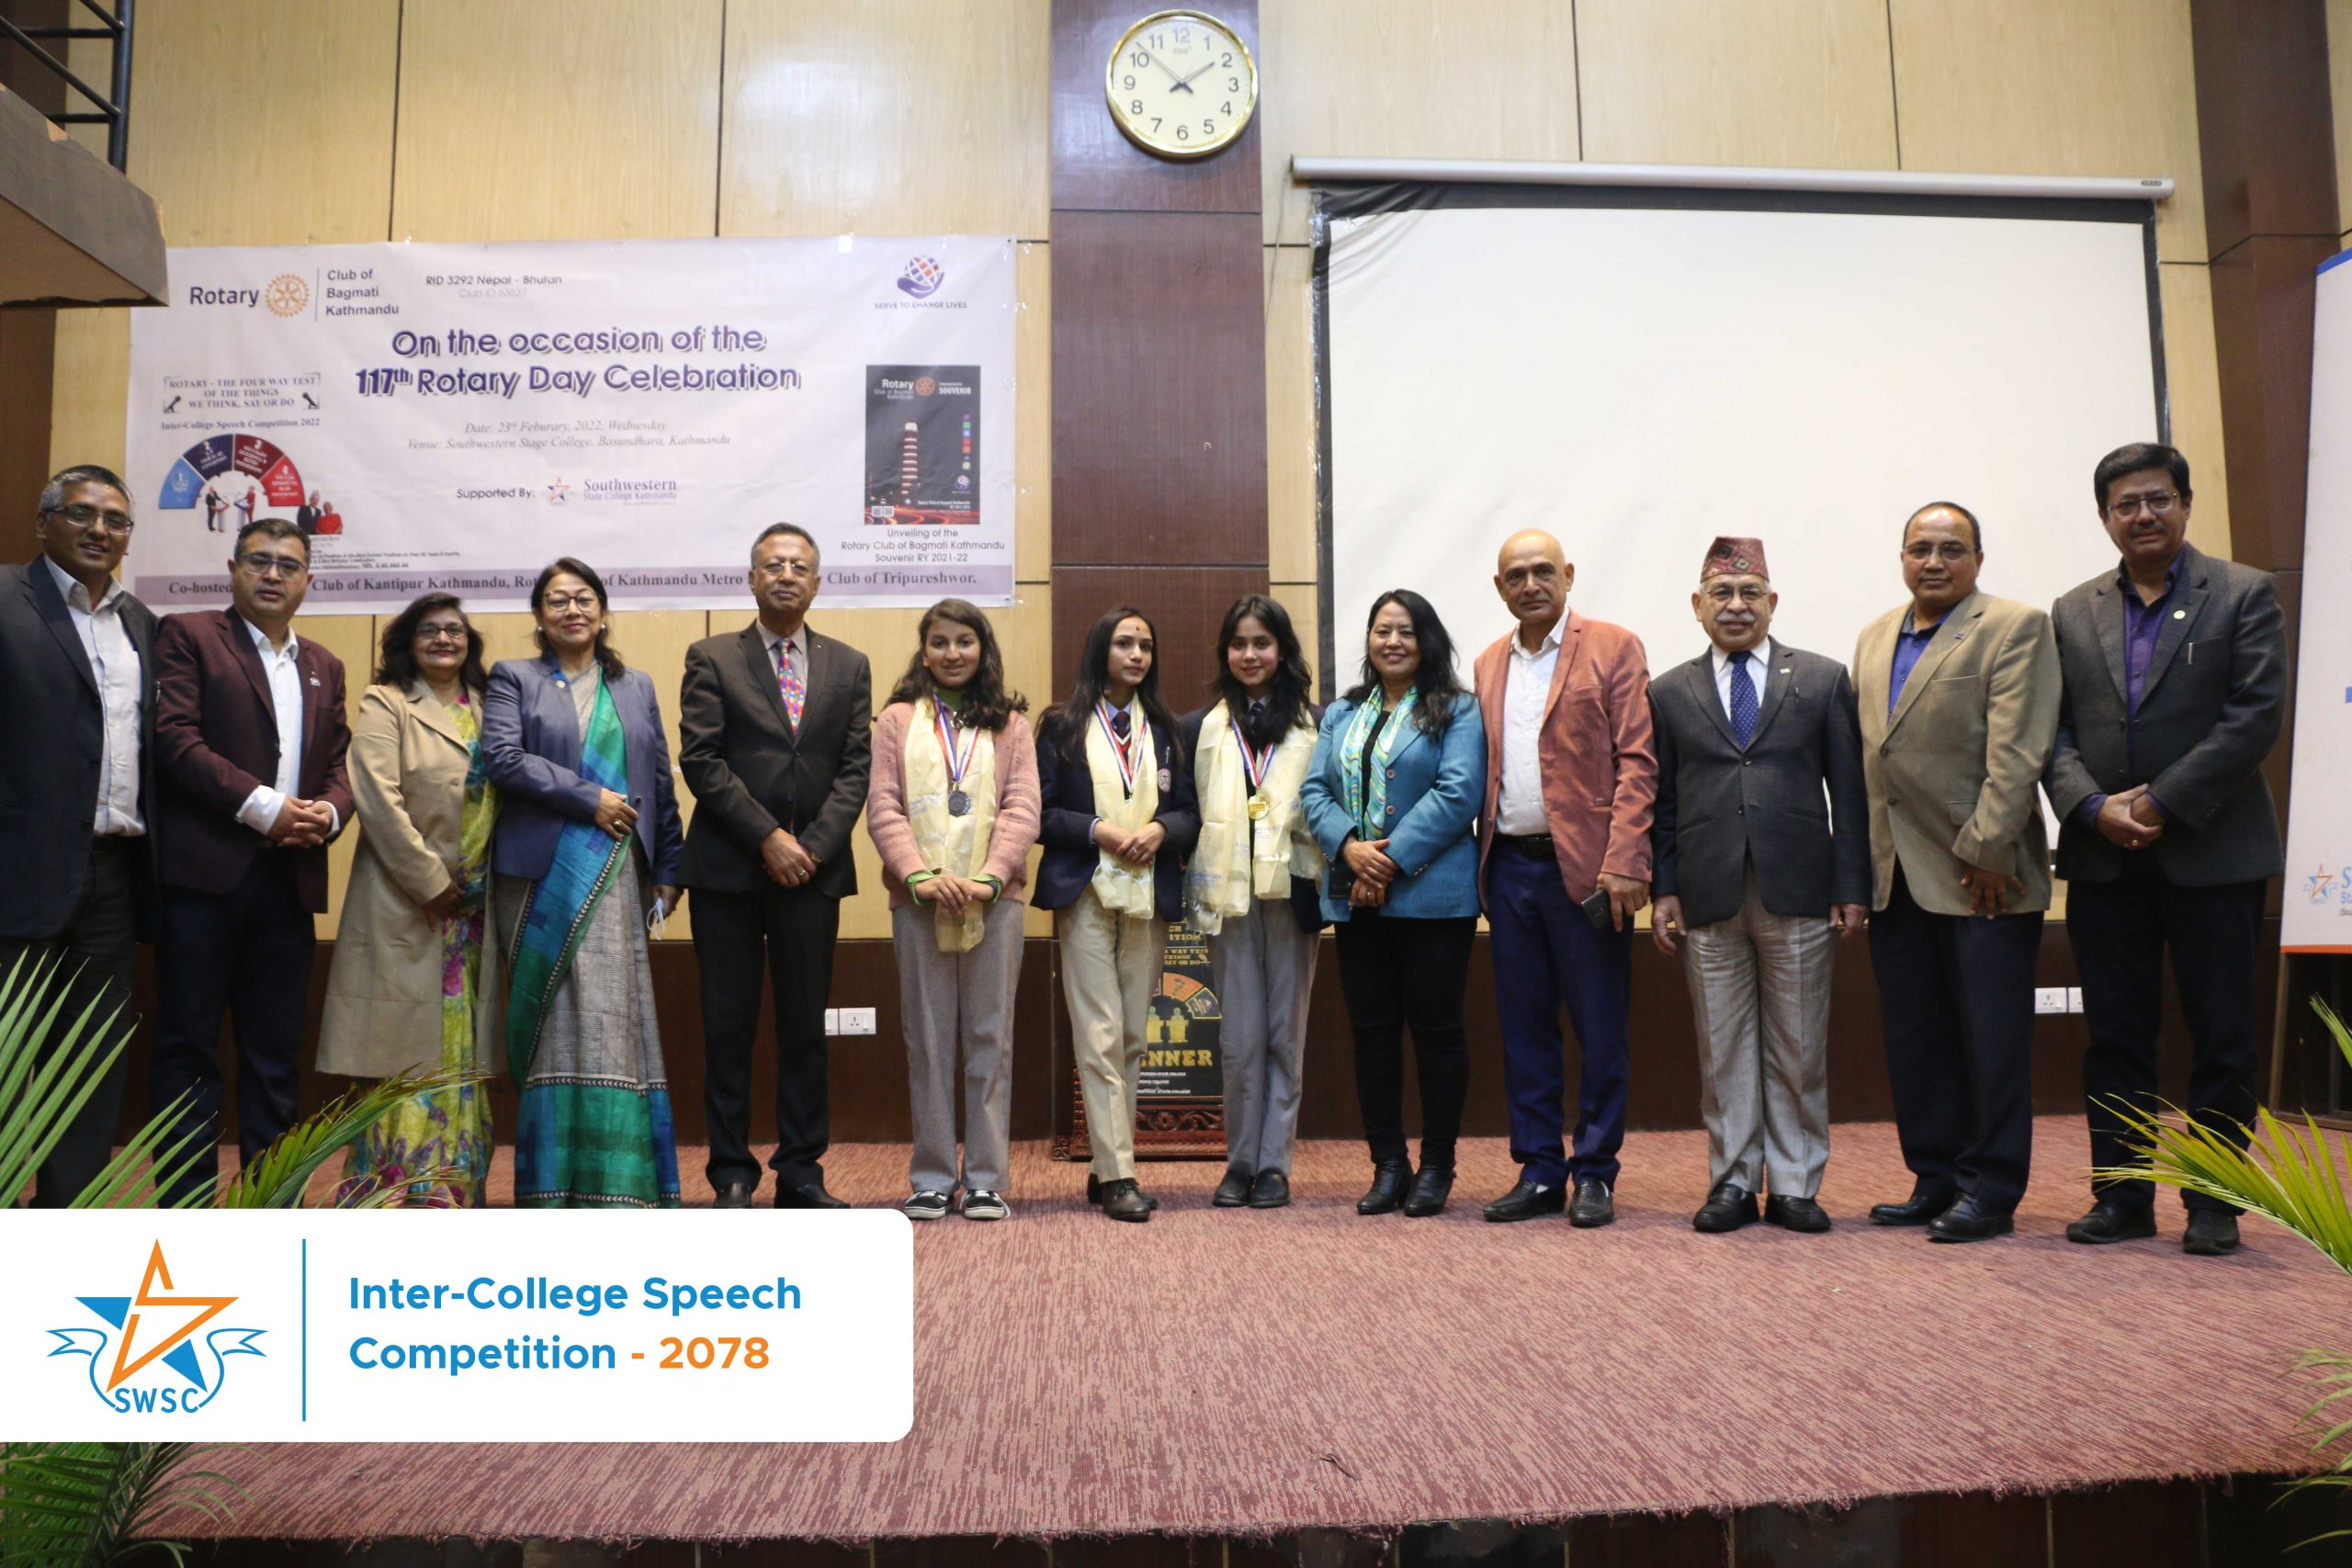 Inter-College Speech Competition 2021